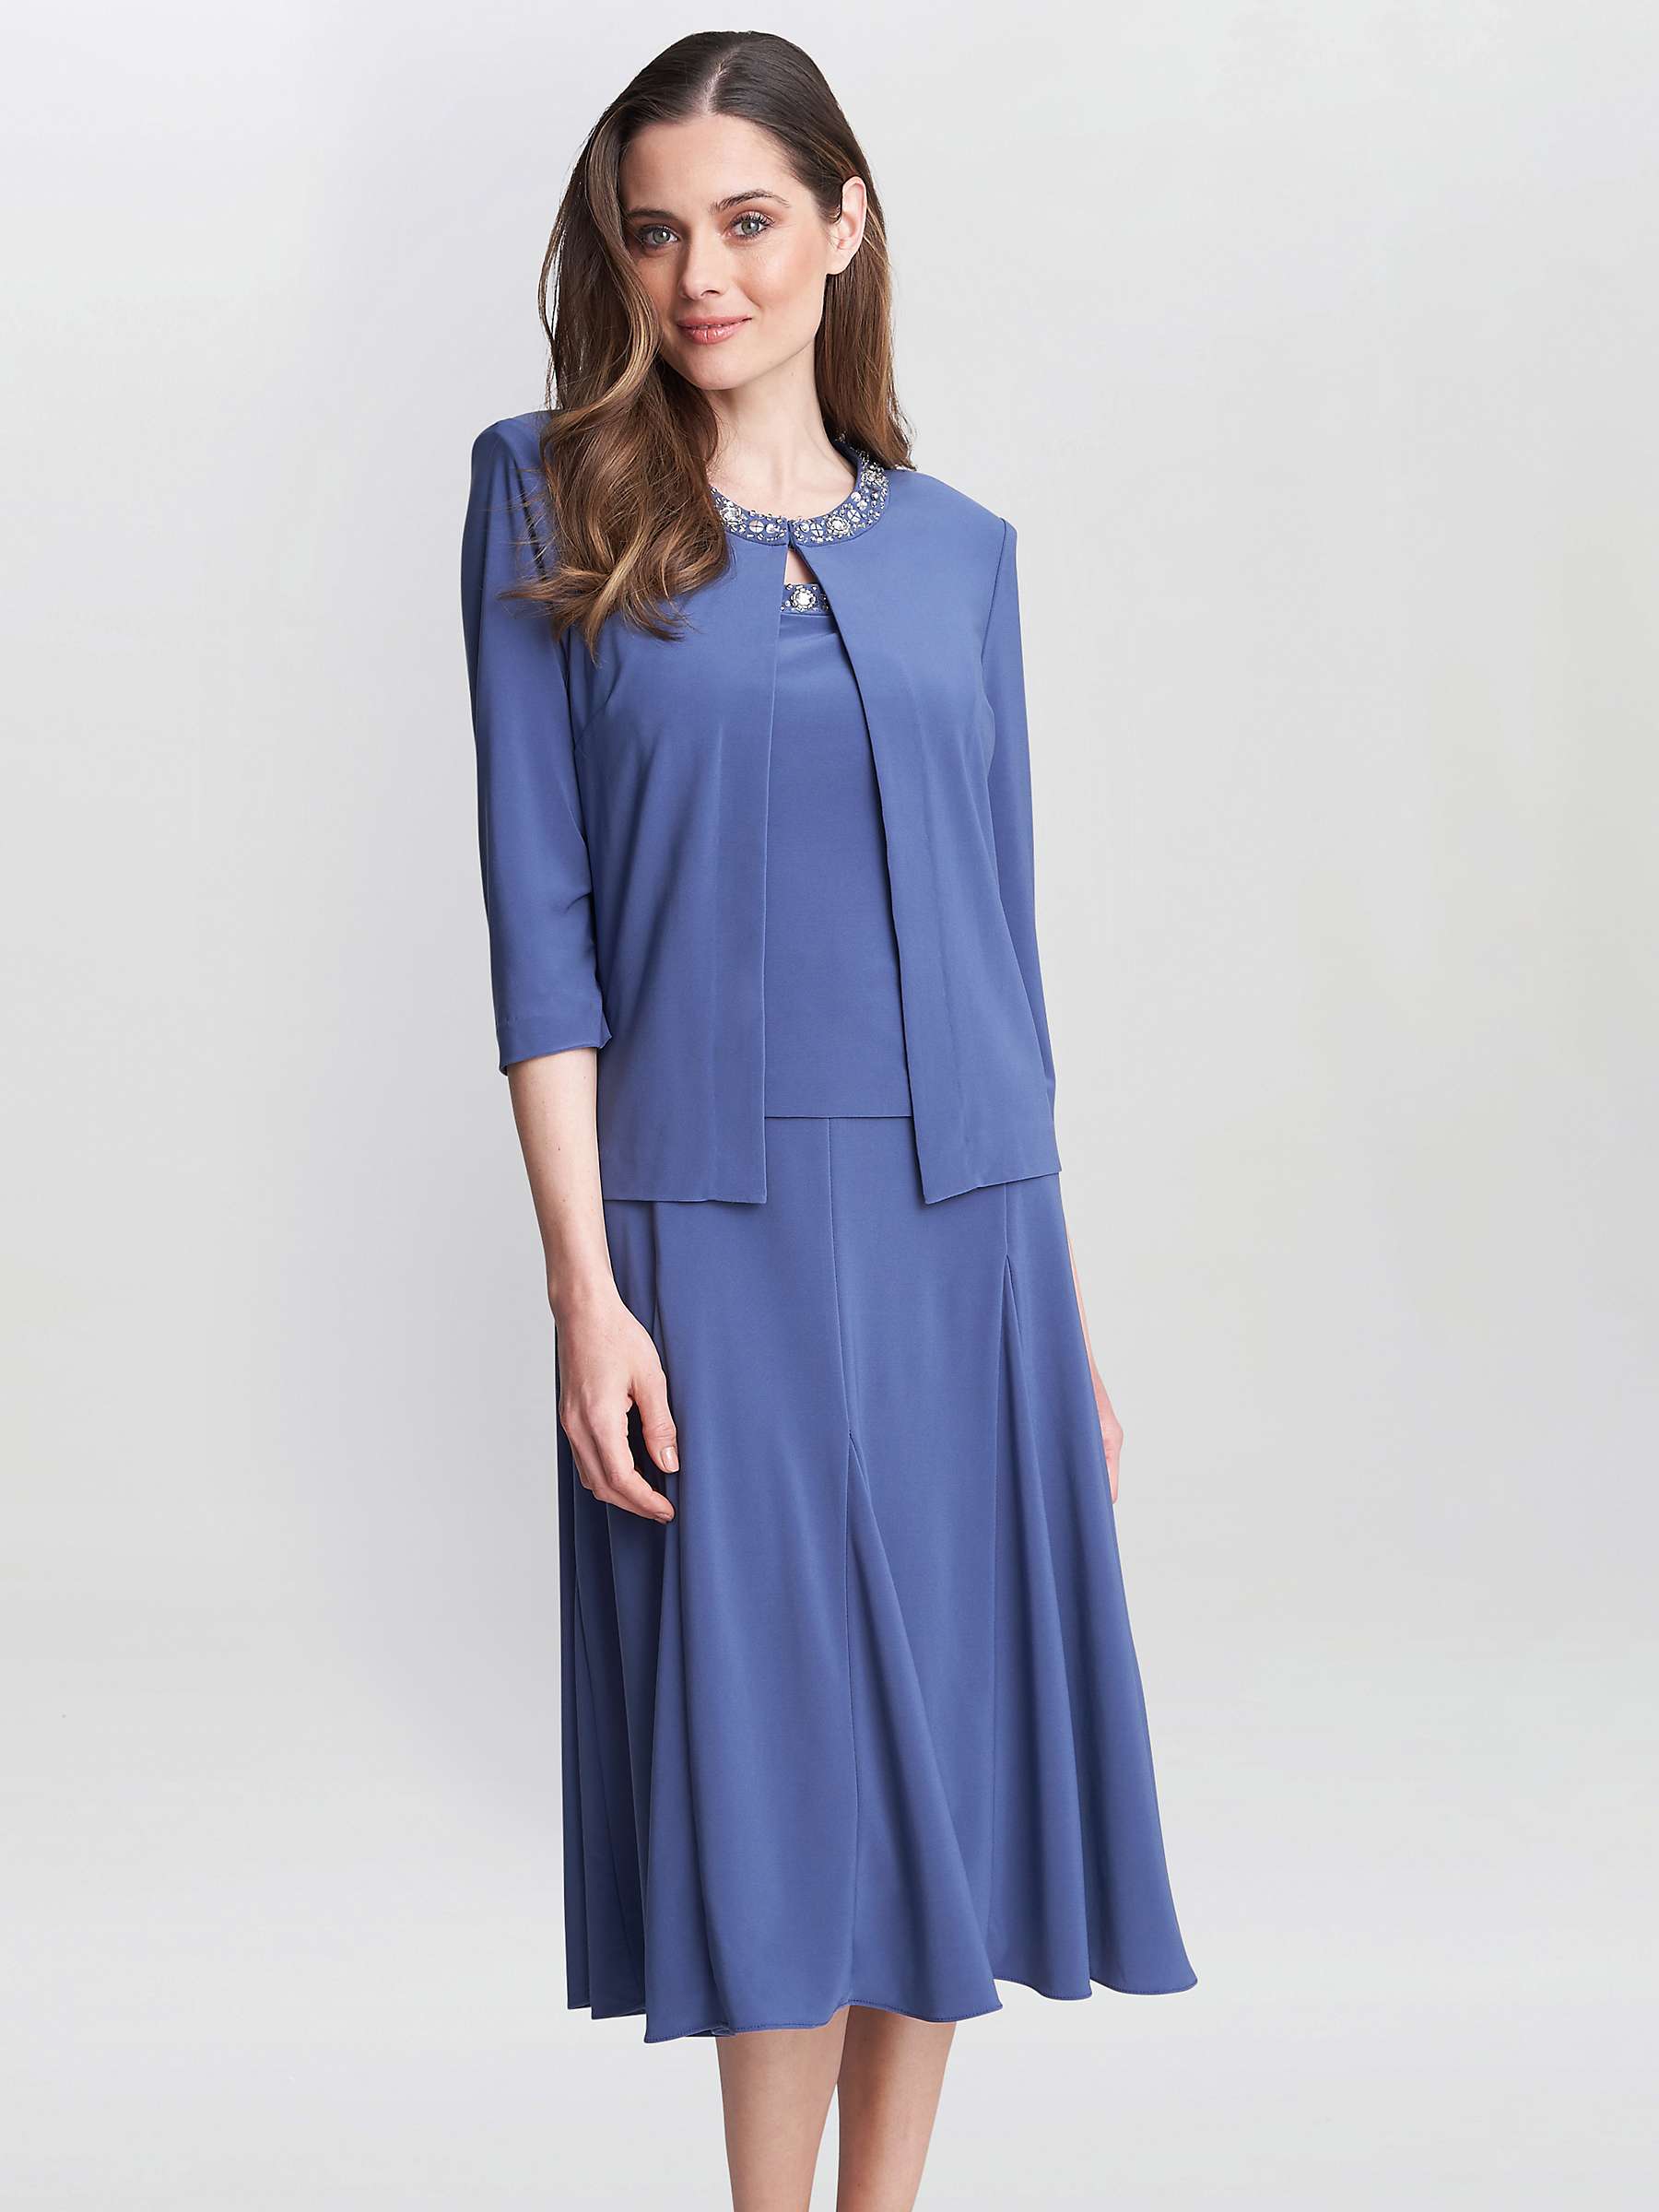 Buy Gina Bacconi Delores Jersey A-Line Jacket Midi Dress, Wedgewood Online at johnlewis.com